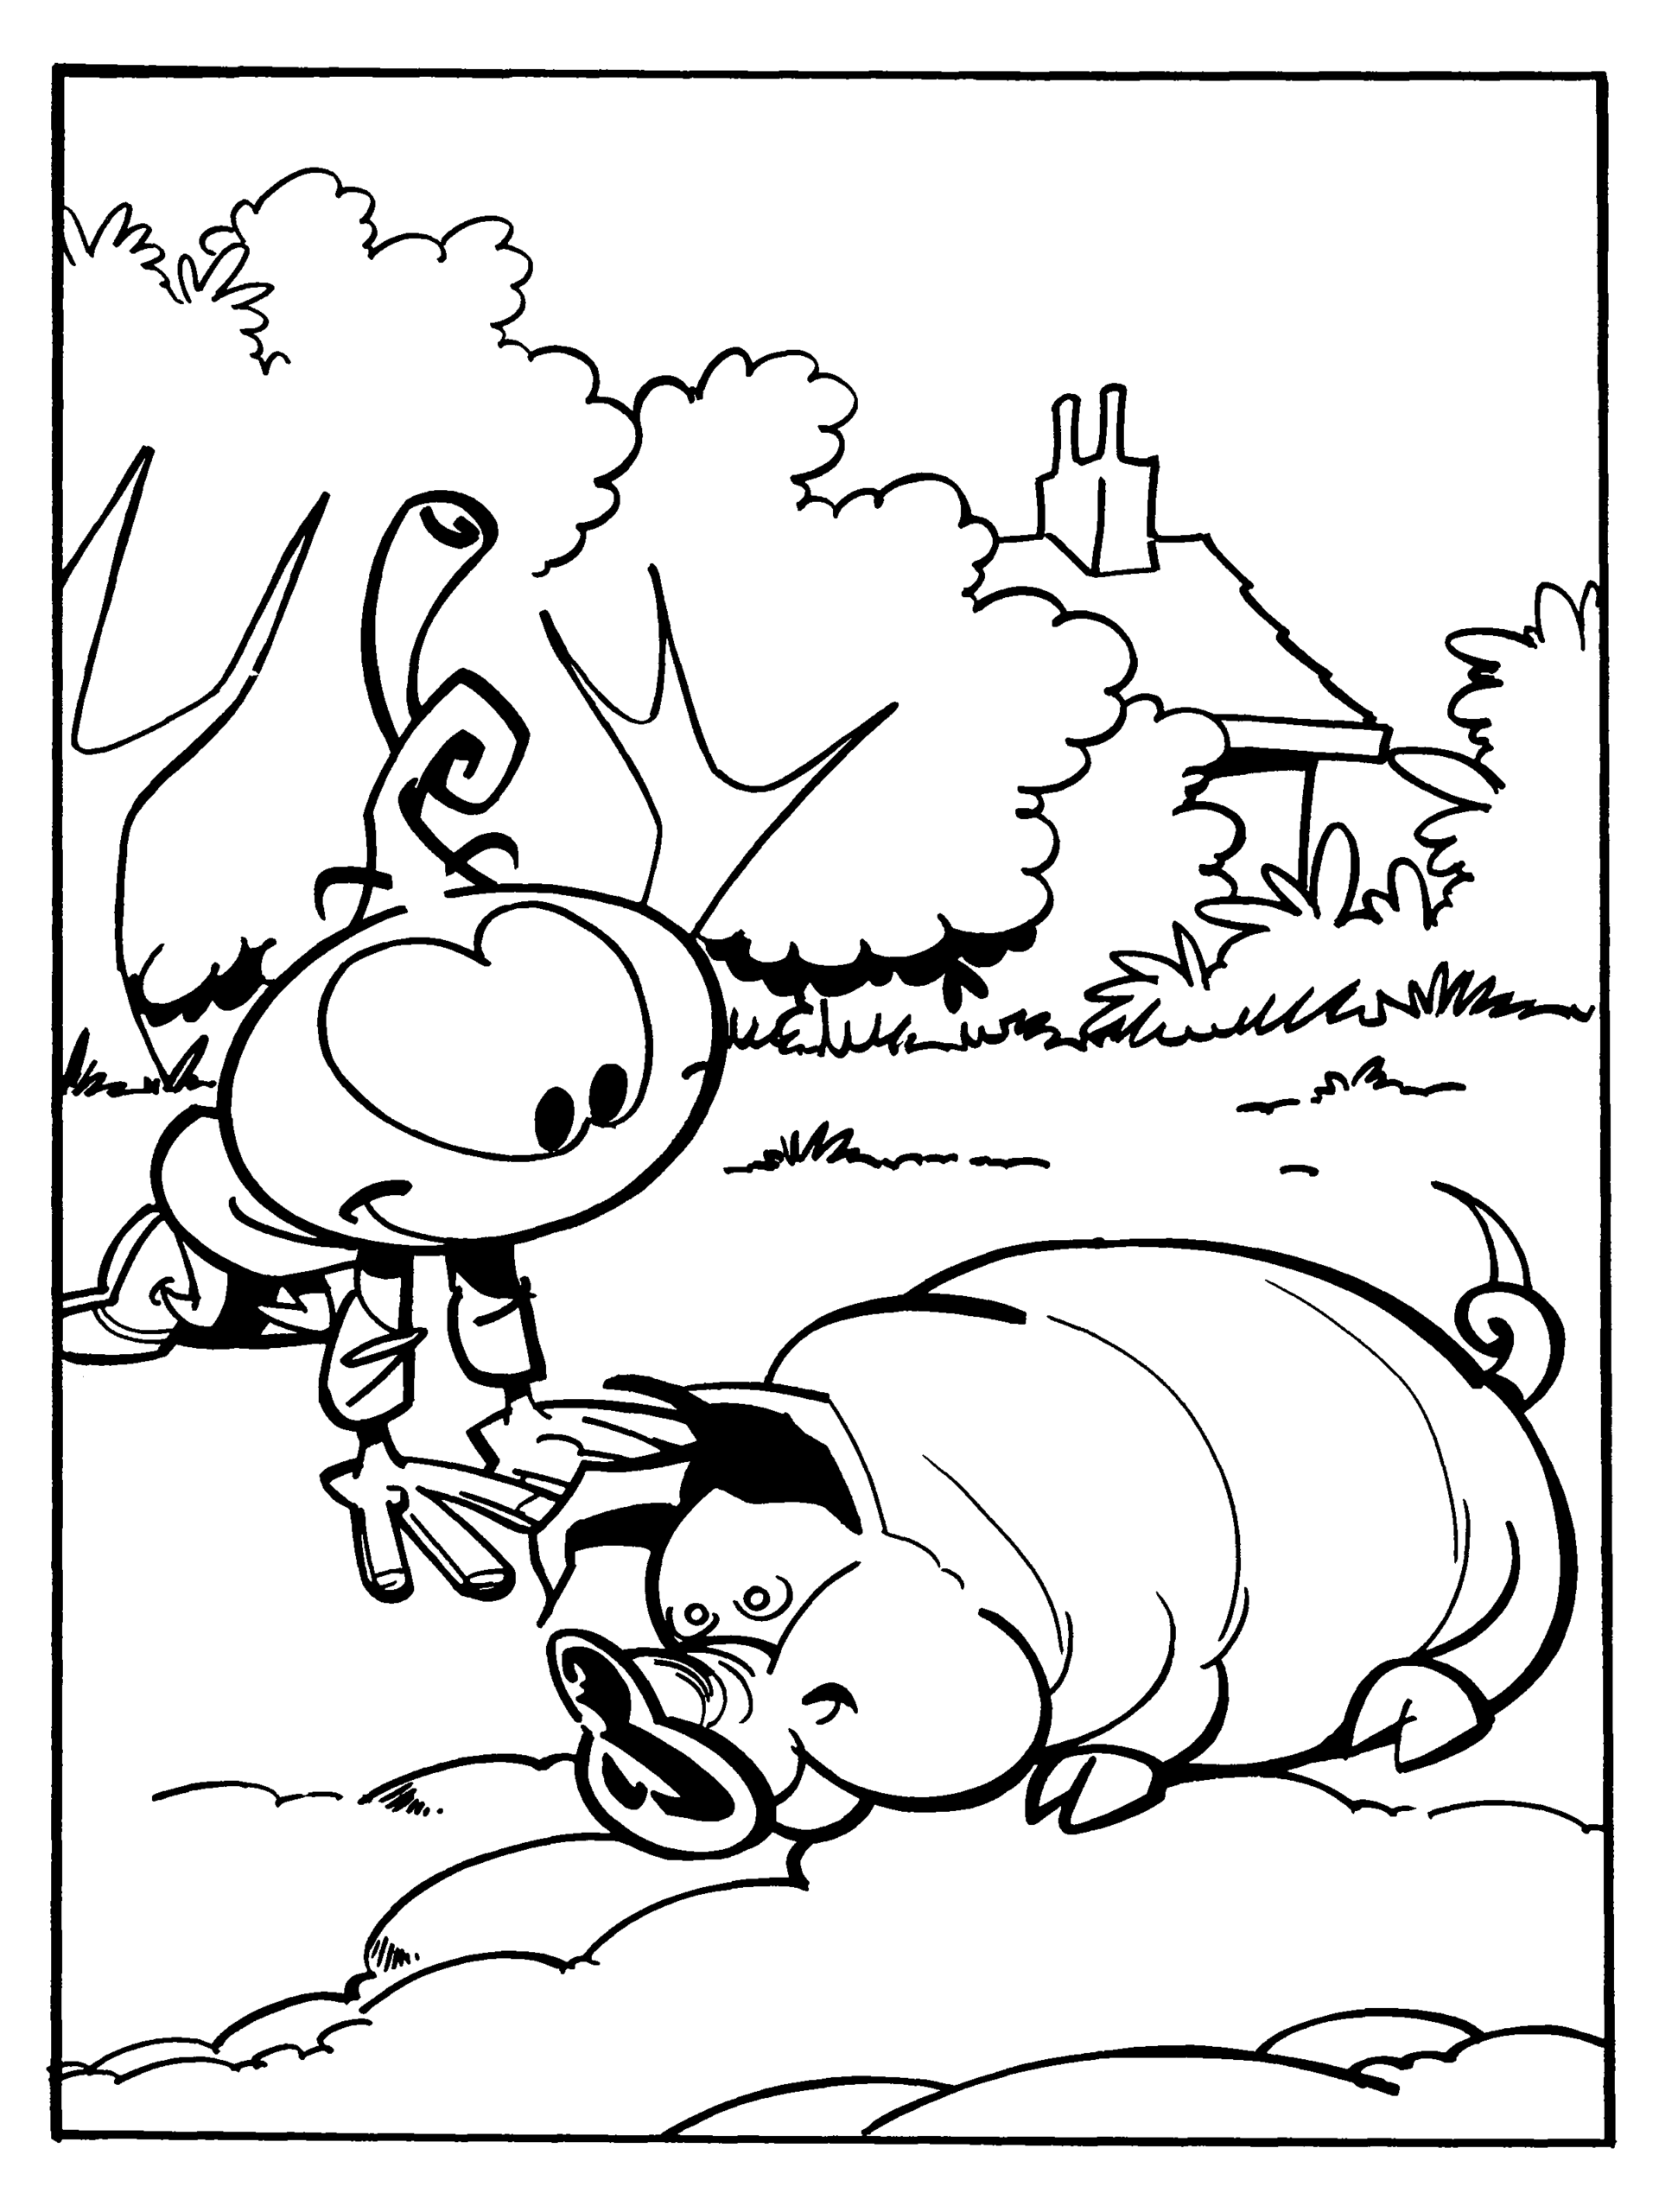 Snorks Coloring Pages TV Film snorks 23 Printable 2020 07656 Coloring4free